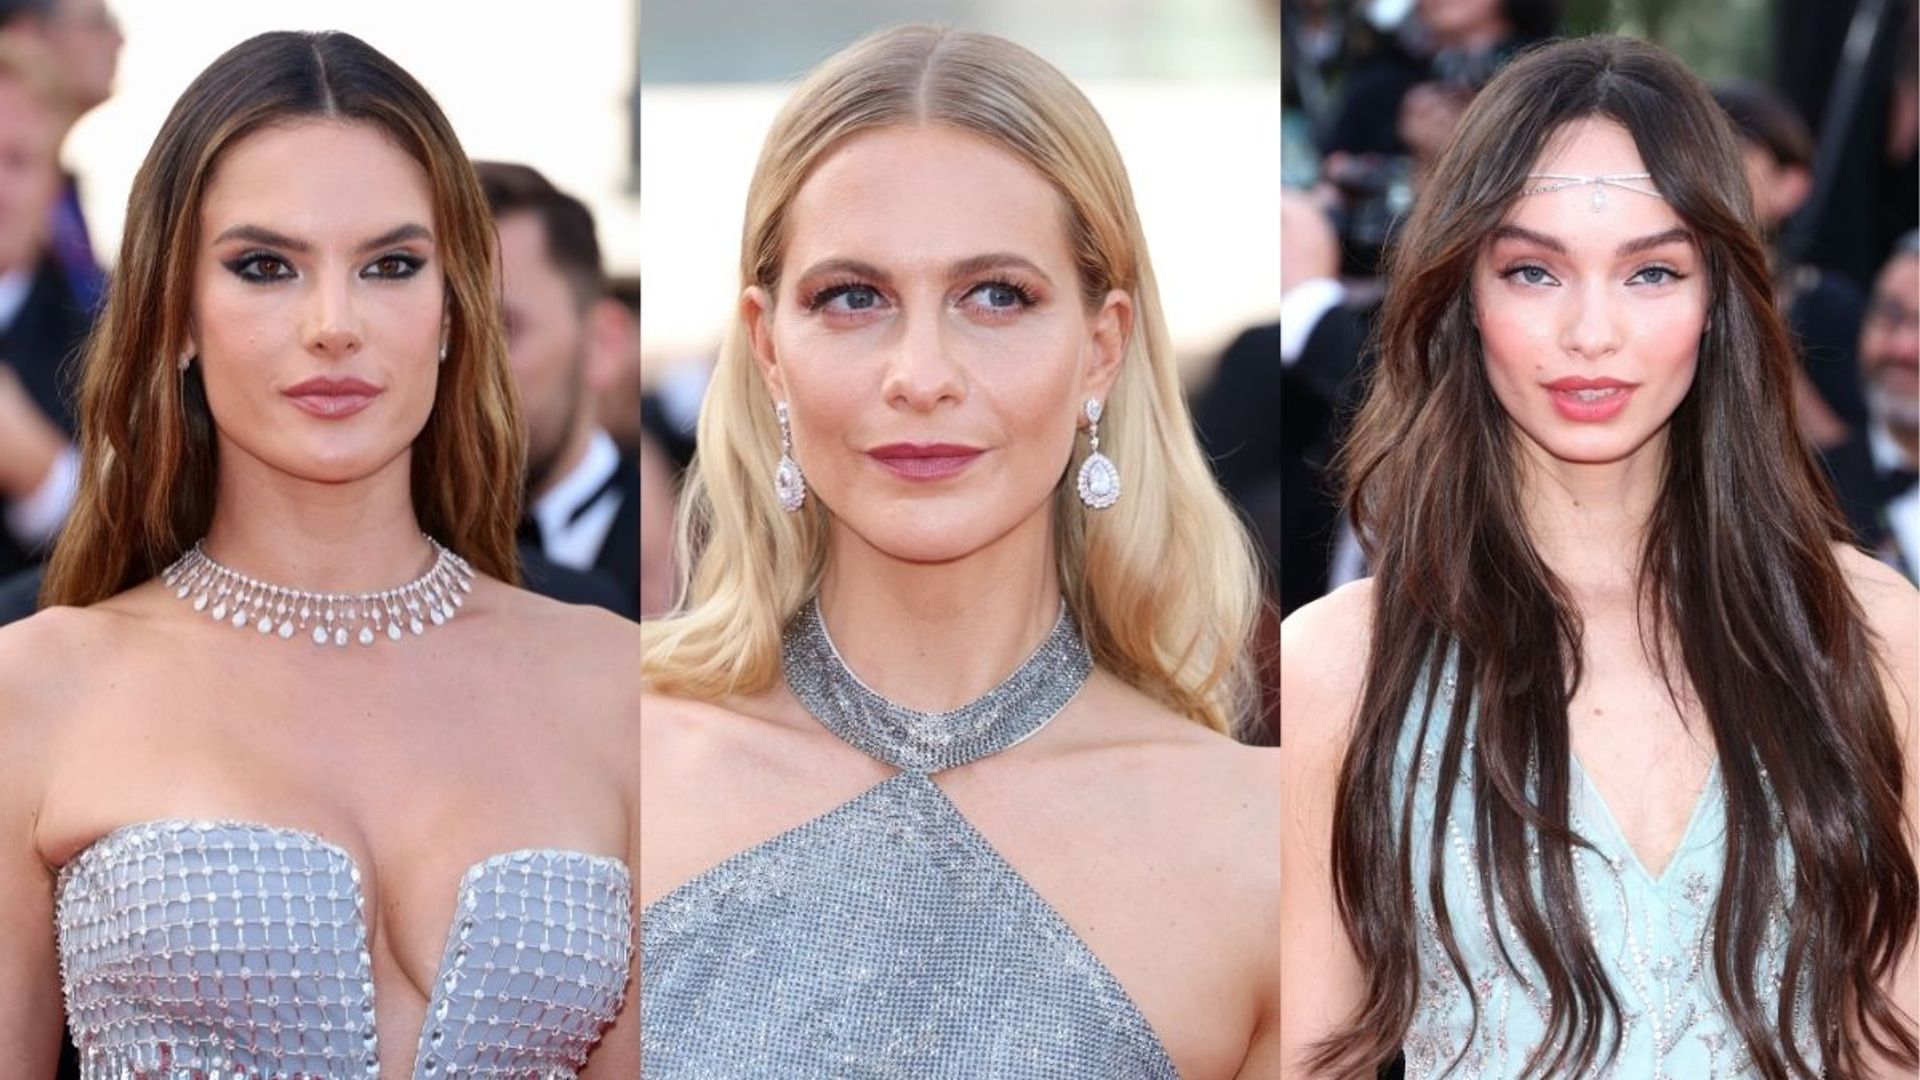 Cannes Film Festival 2022: The best beauty looks on the red carpet